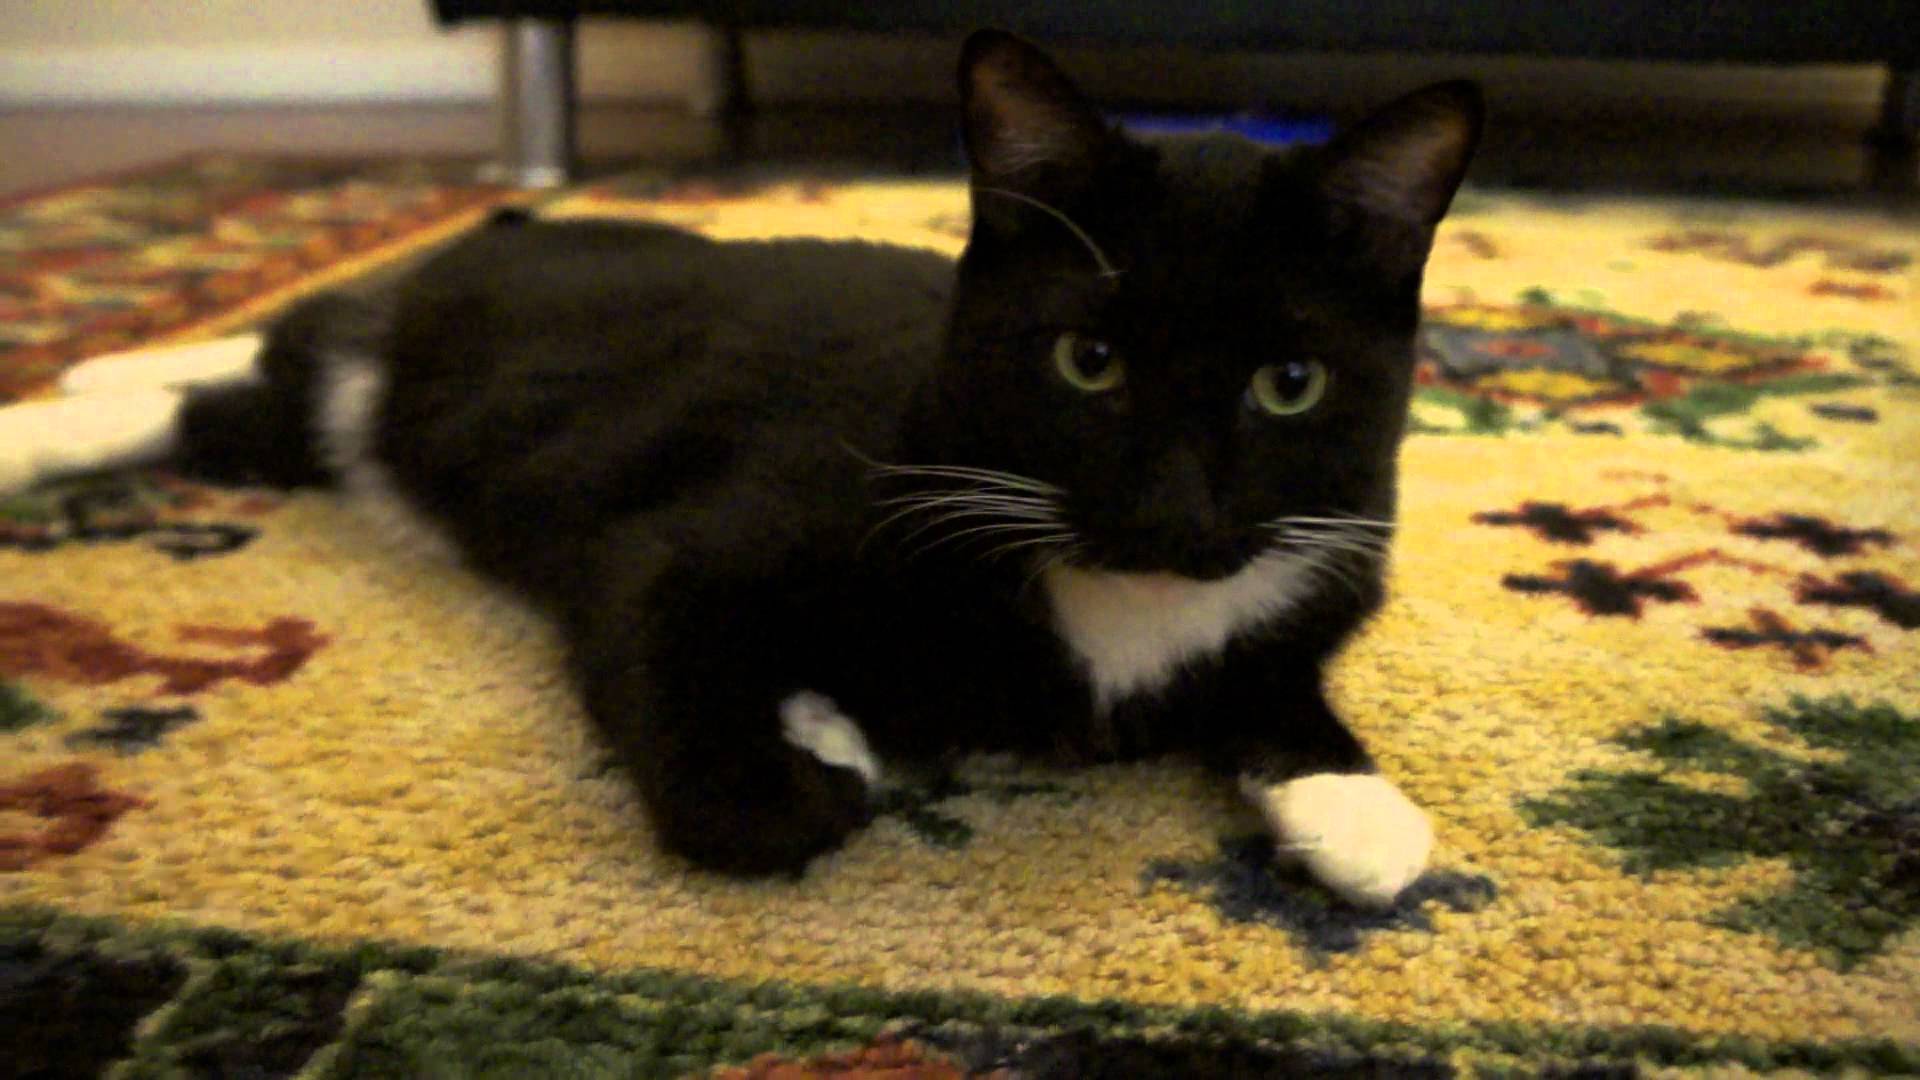 Max The Tuxedo Cat record with Sony NEX-5N 1080p 60Fps low light ...